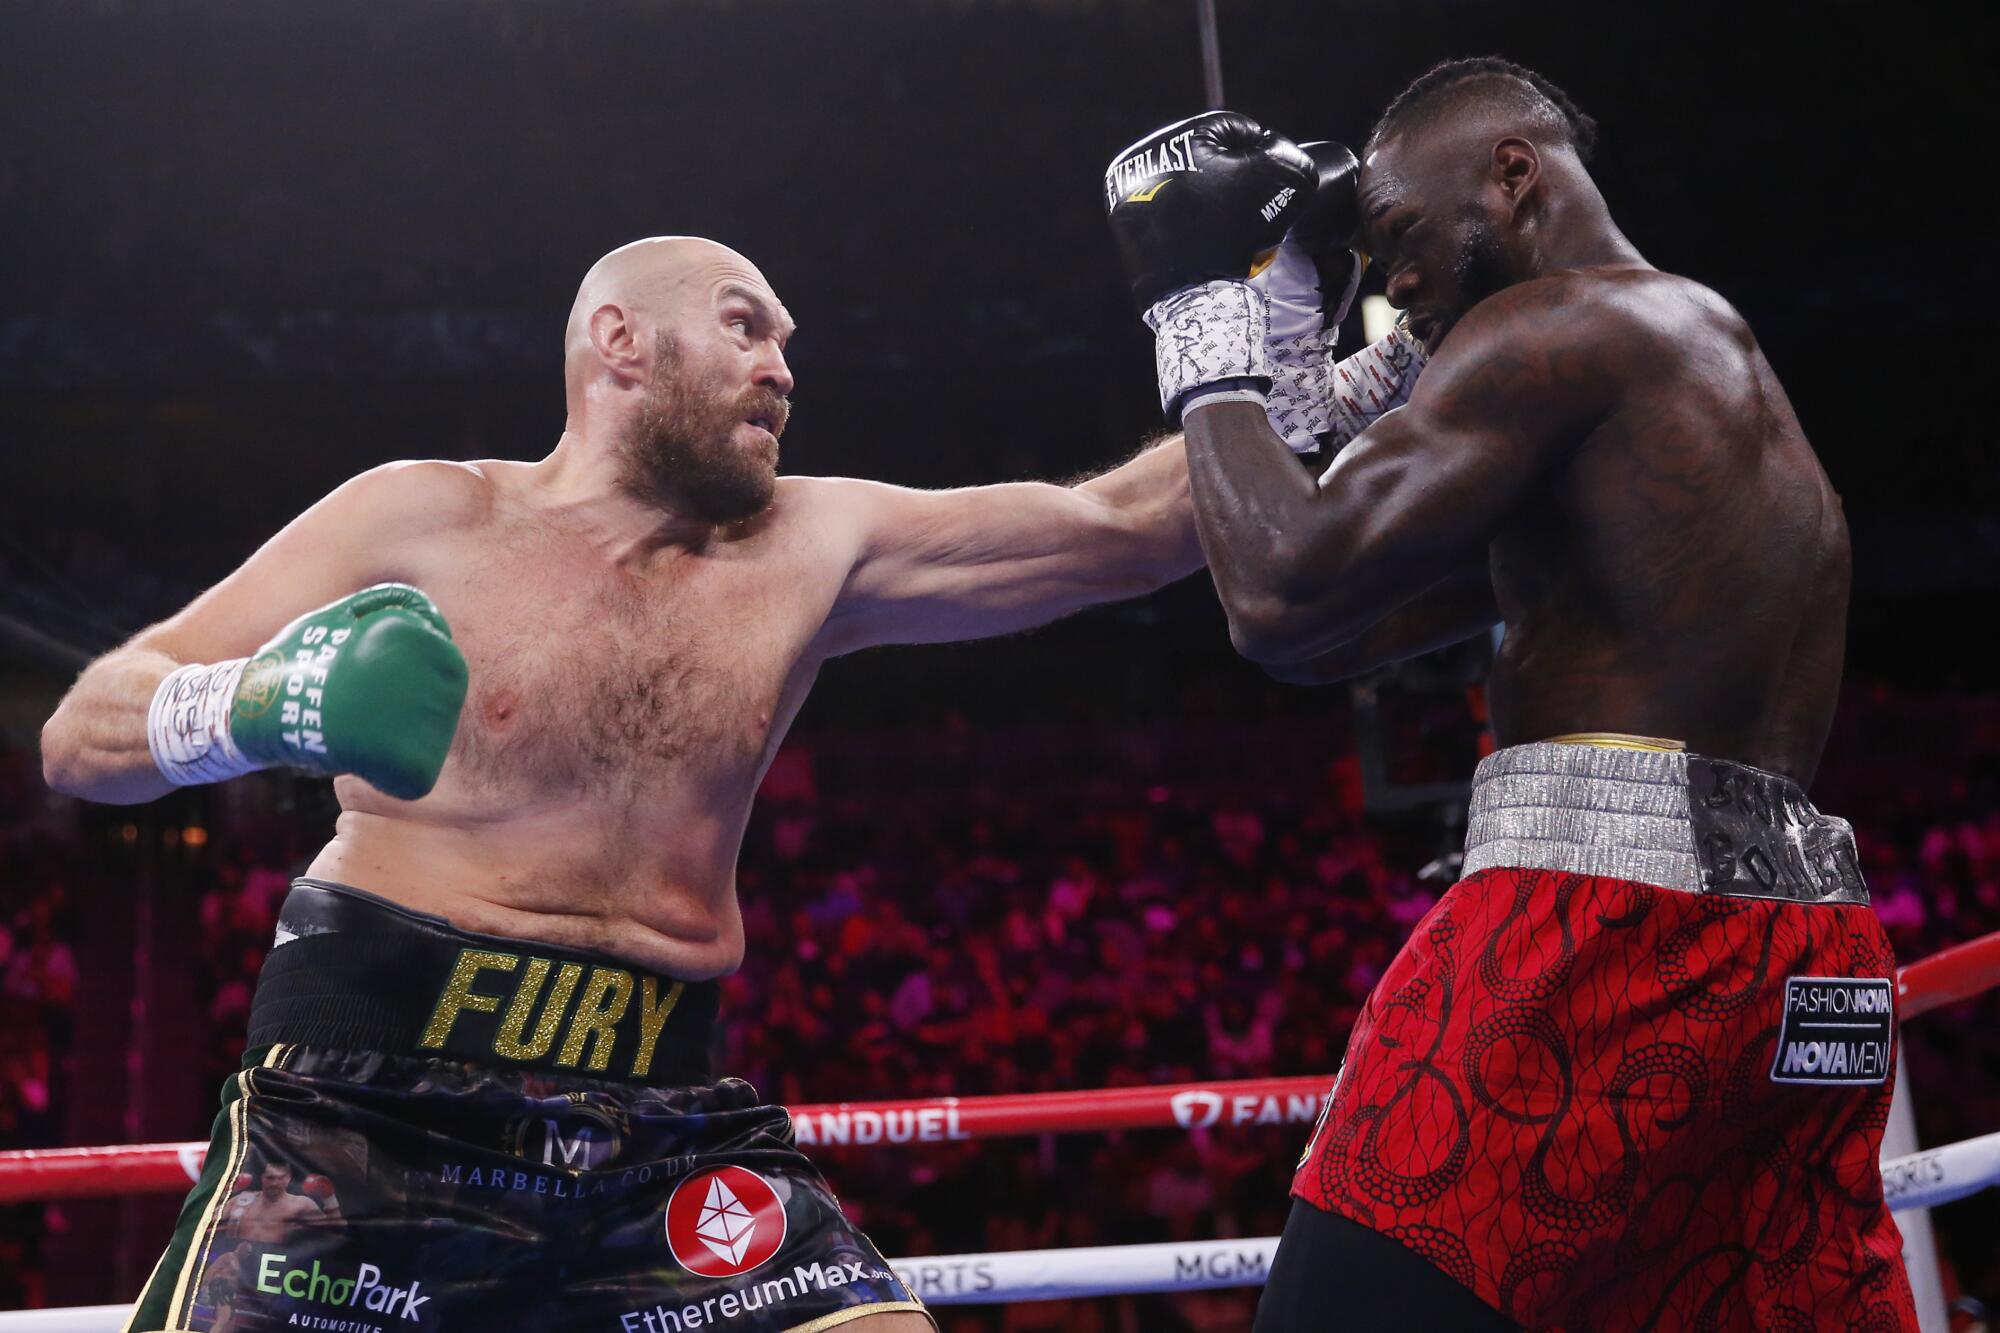 Tyson Fury hits Deontay Wilder during a heavyweight championship boxing match Saturday.